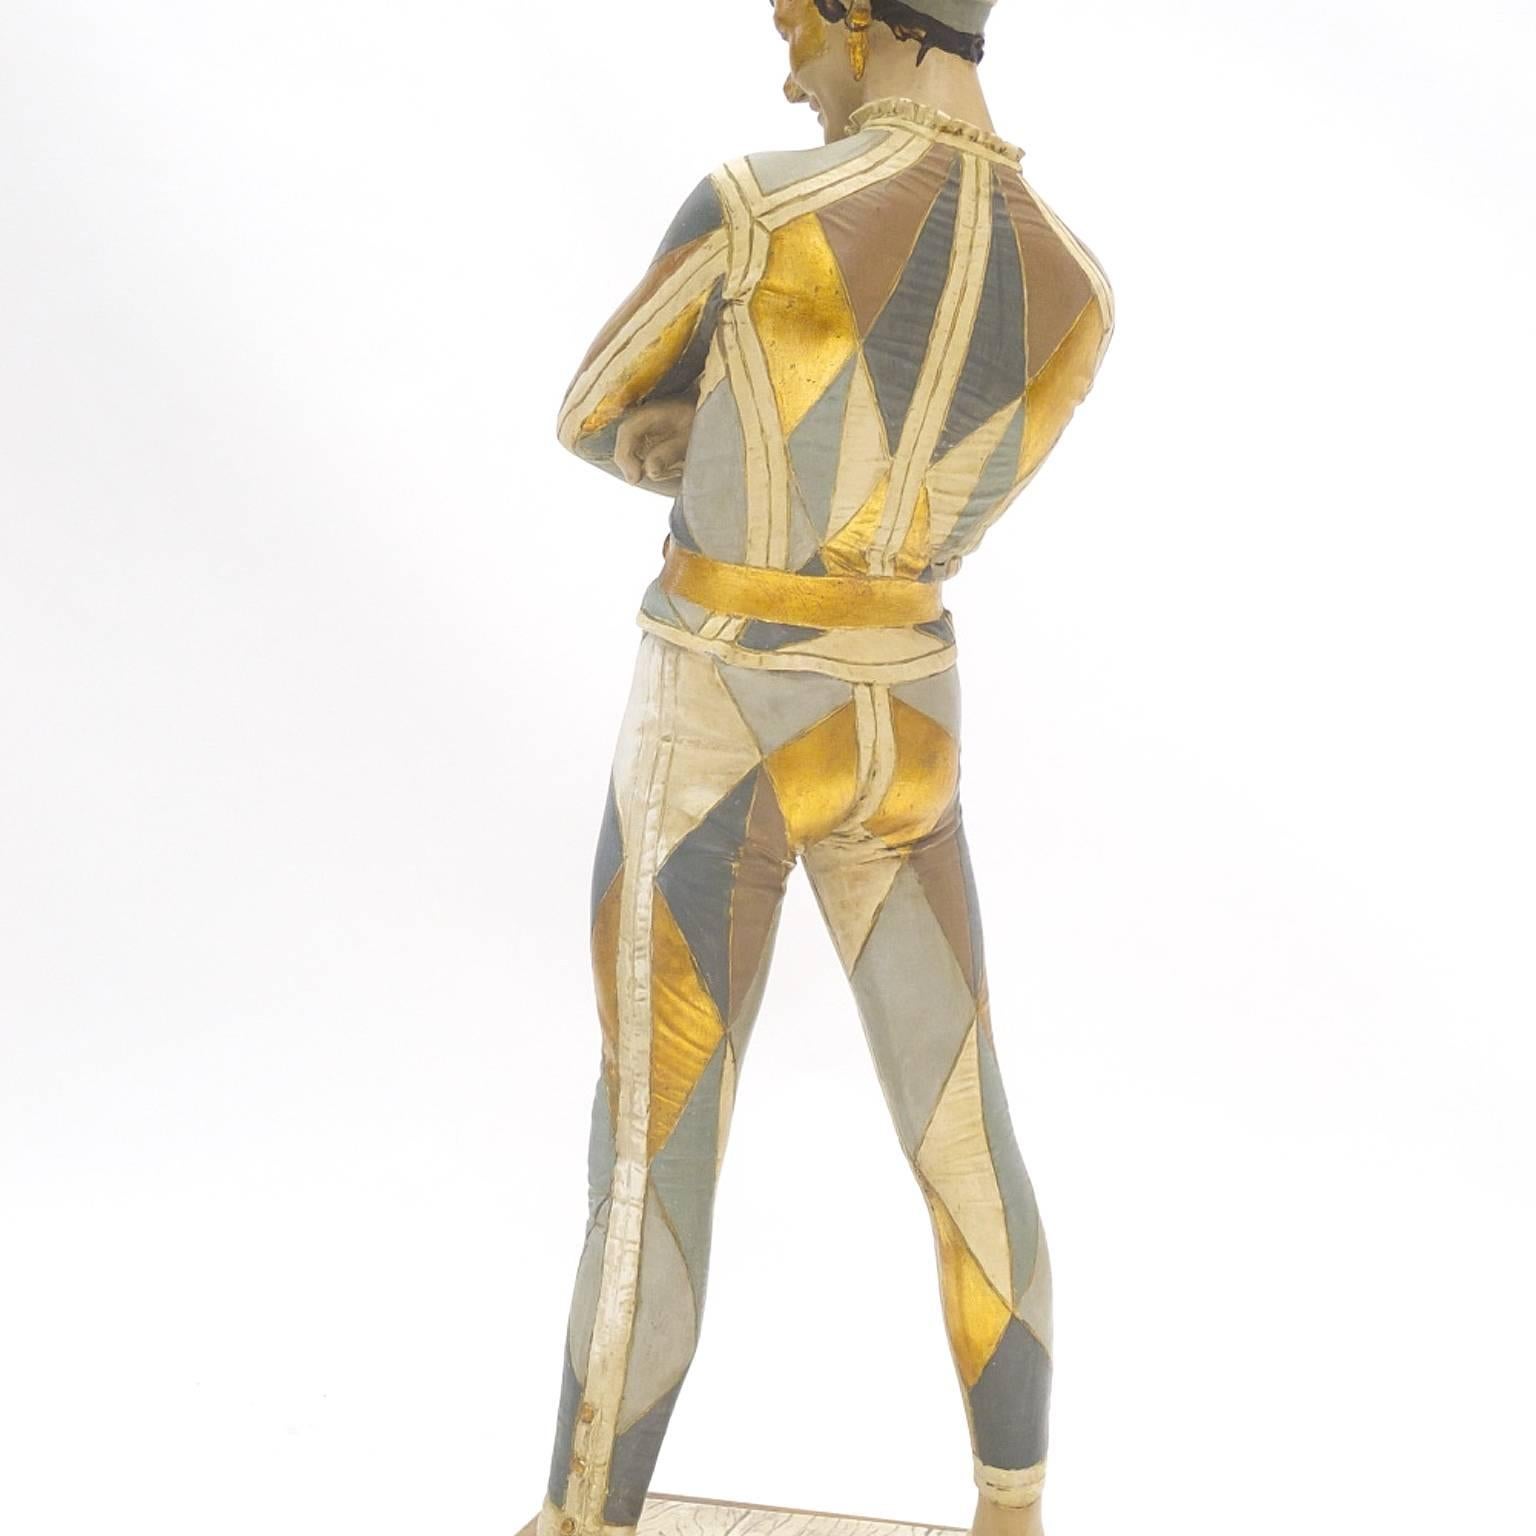 Harlequin Jester lamp by The Marbro Lamp Company, 1968. The design is based on an 1879 bronze sculpture, with “1879 – St. Marceaux” inscribed on the base. Please note that this is the much larger and more rare version. Comes with original shade. The